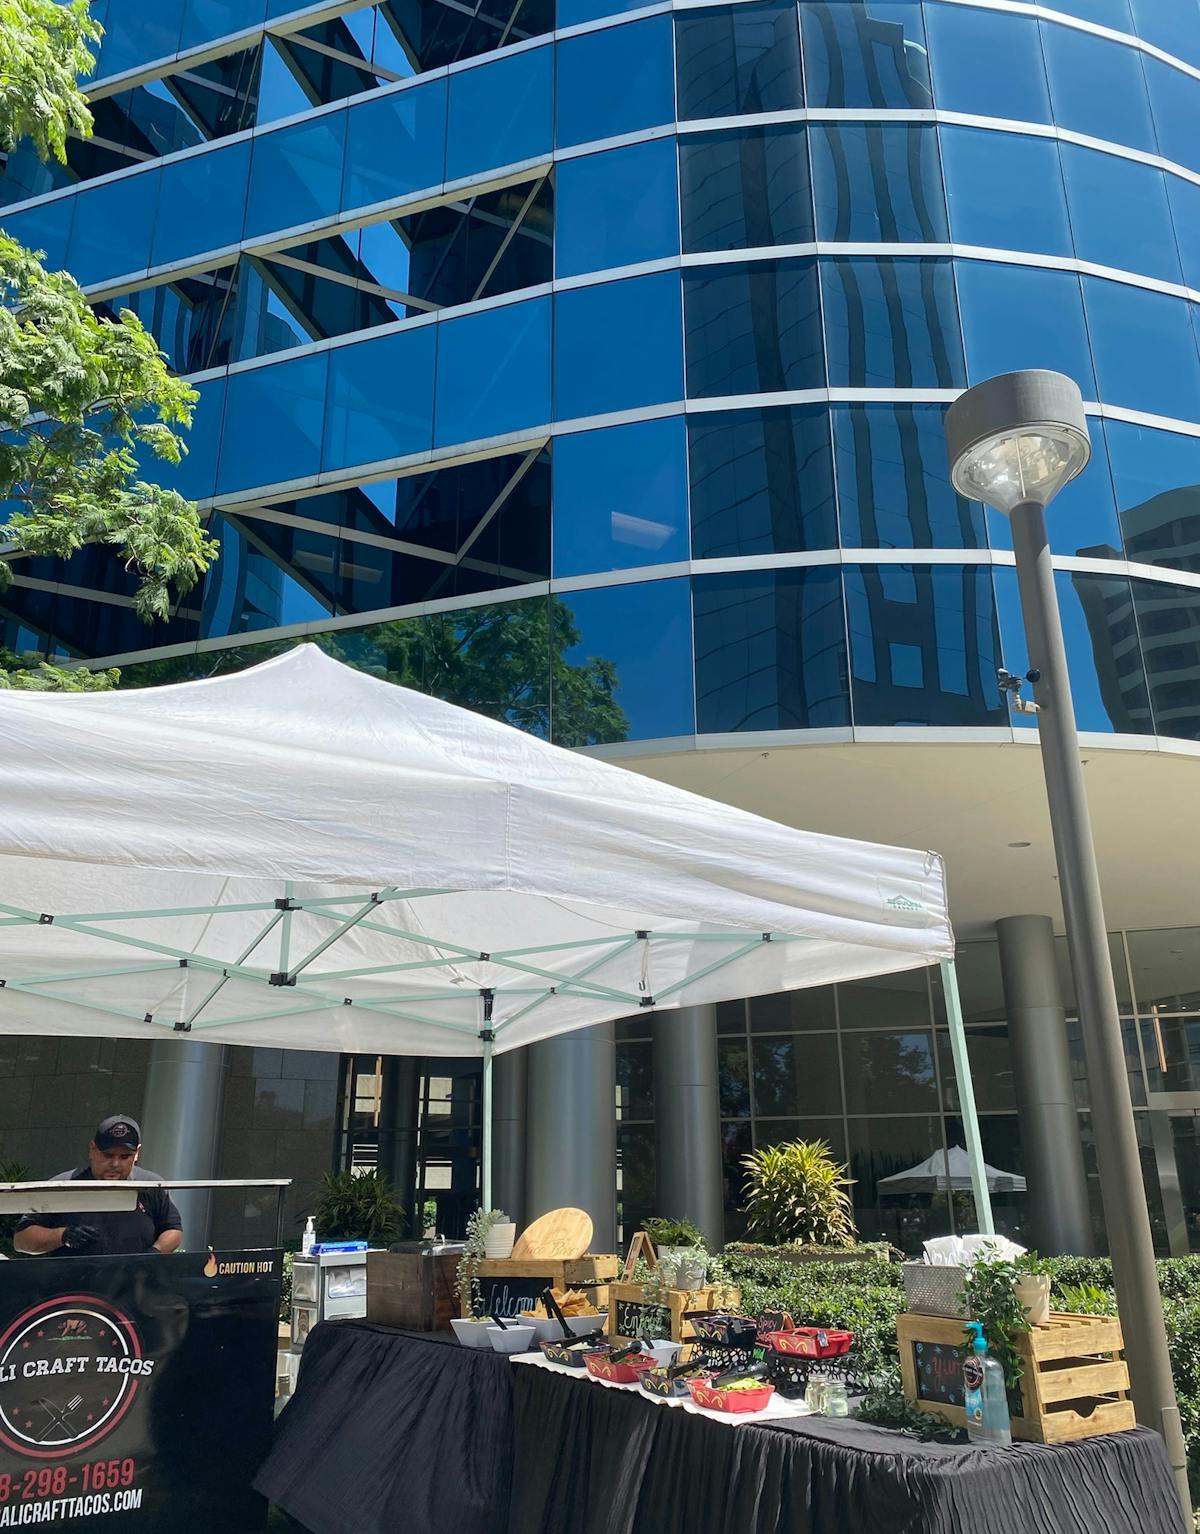 a photo of cali craft tacos food booth set up in front of a tall glass building